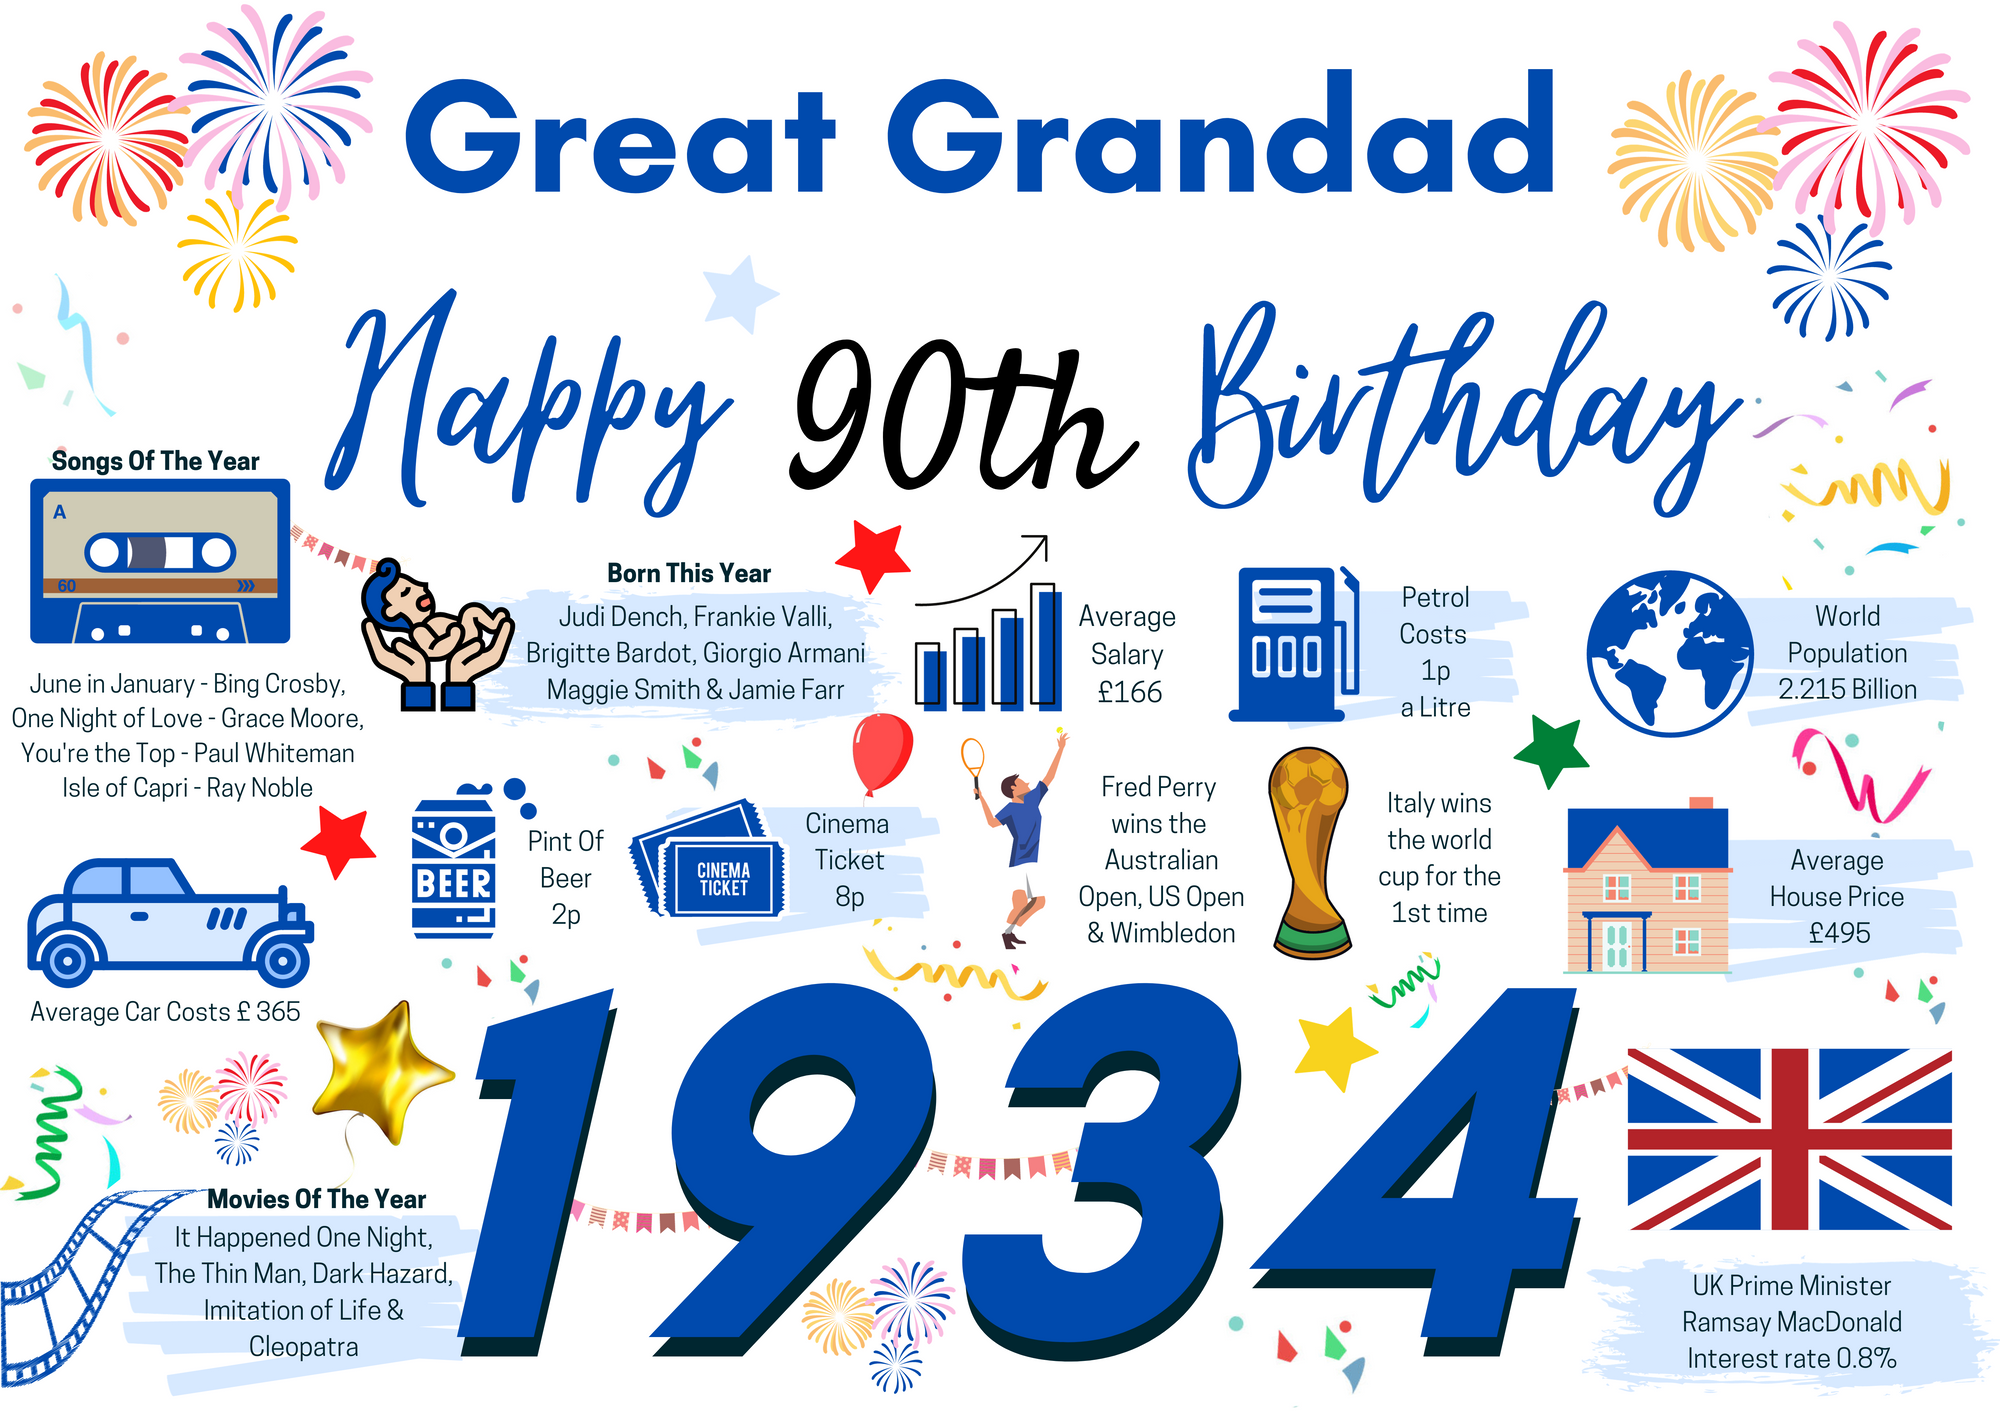 90th Birthday Card For Great Grandad, Birthday Card For Him, Happy 90th Greetings Card Born In 1934 Facts